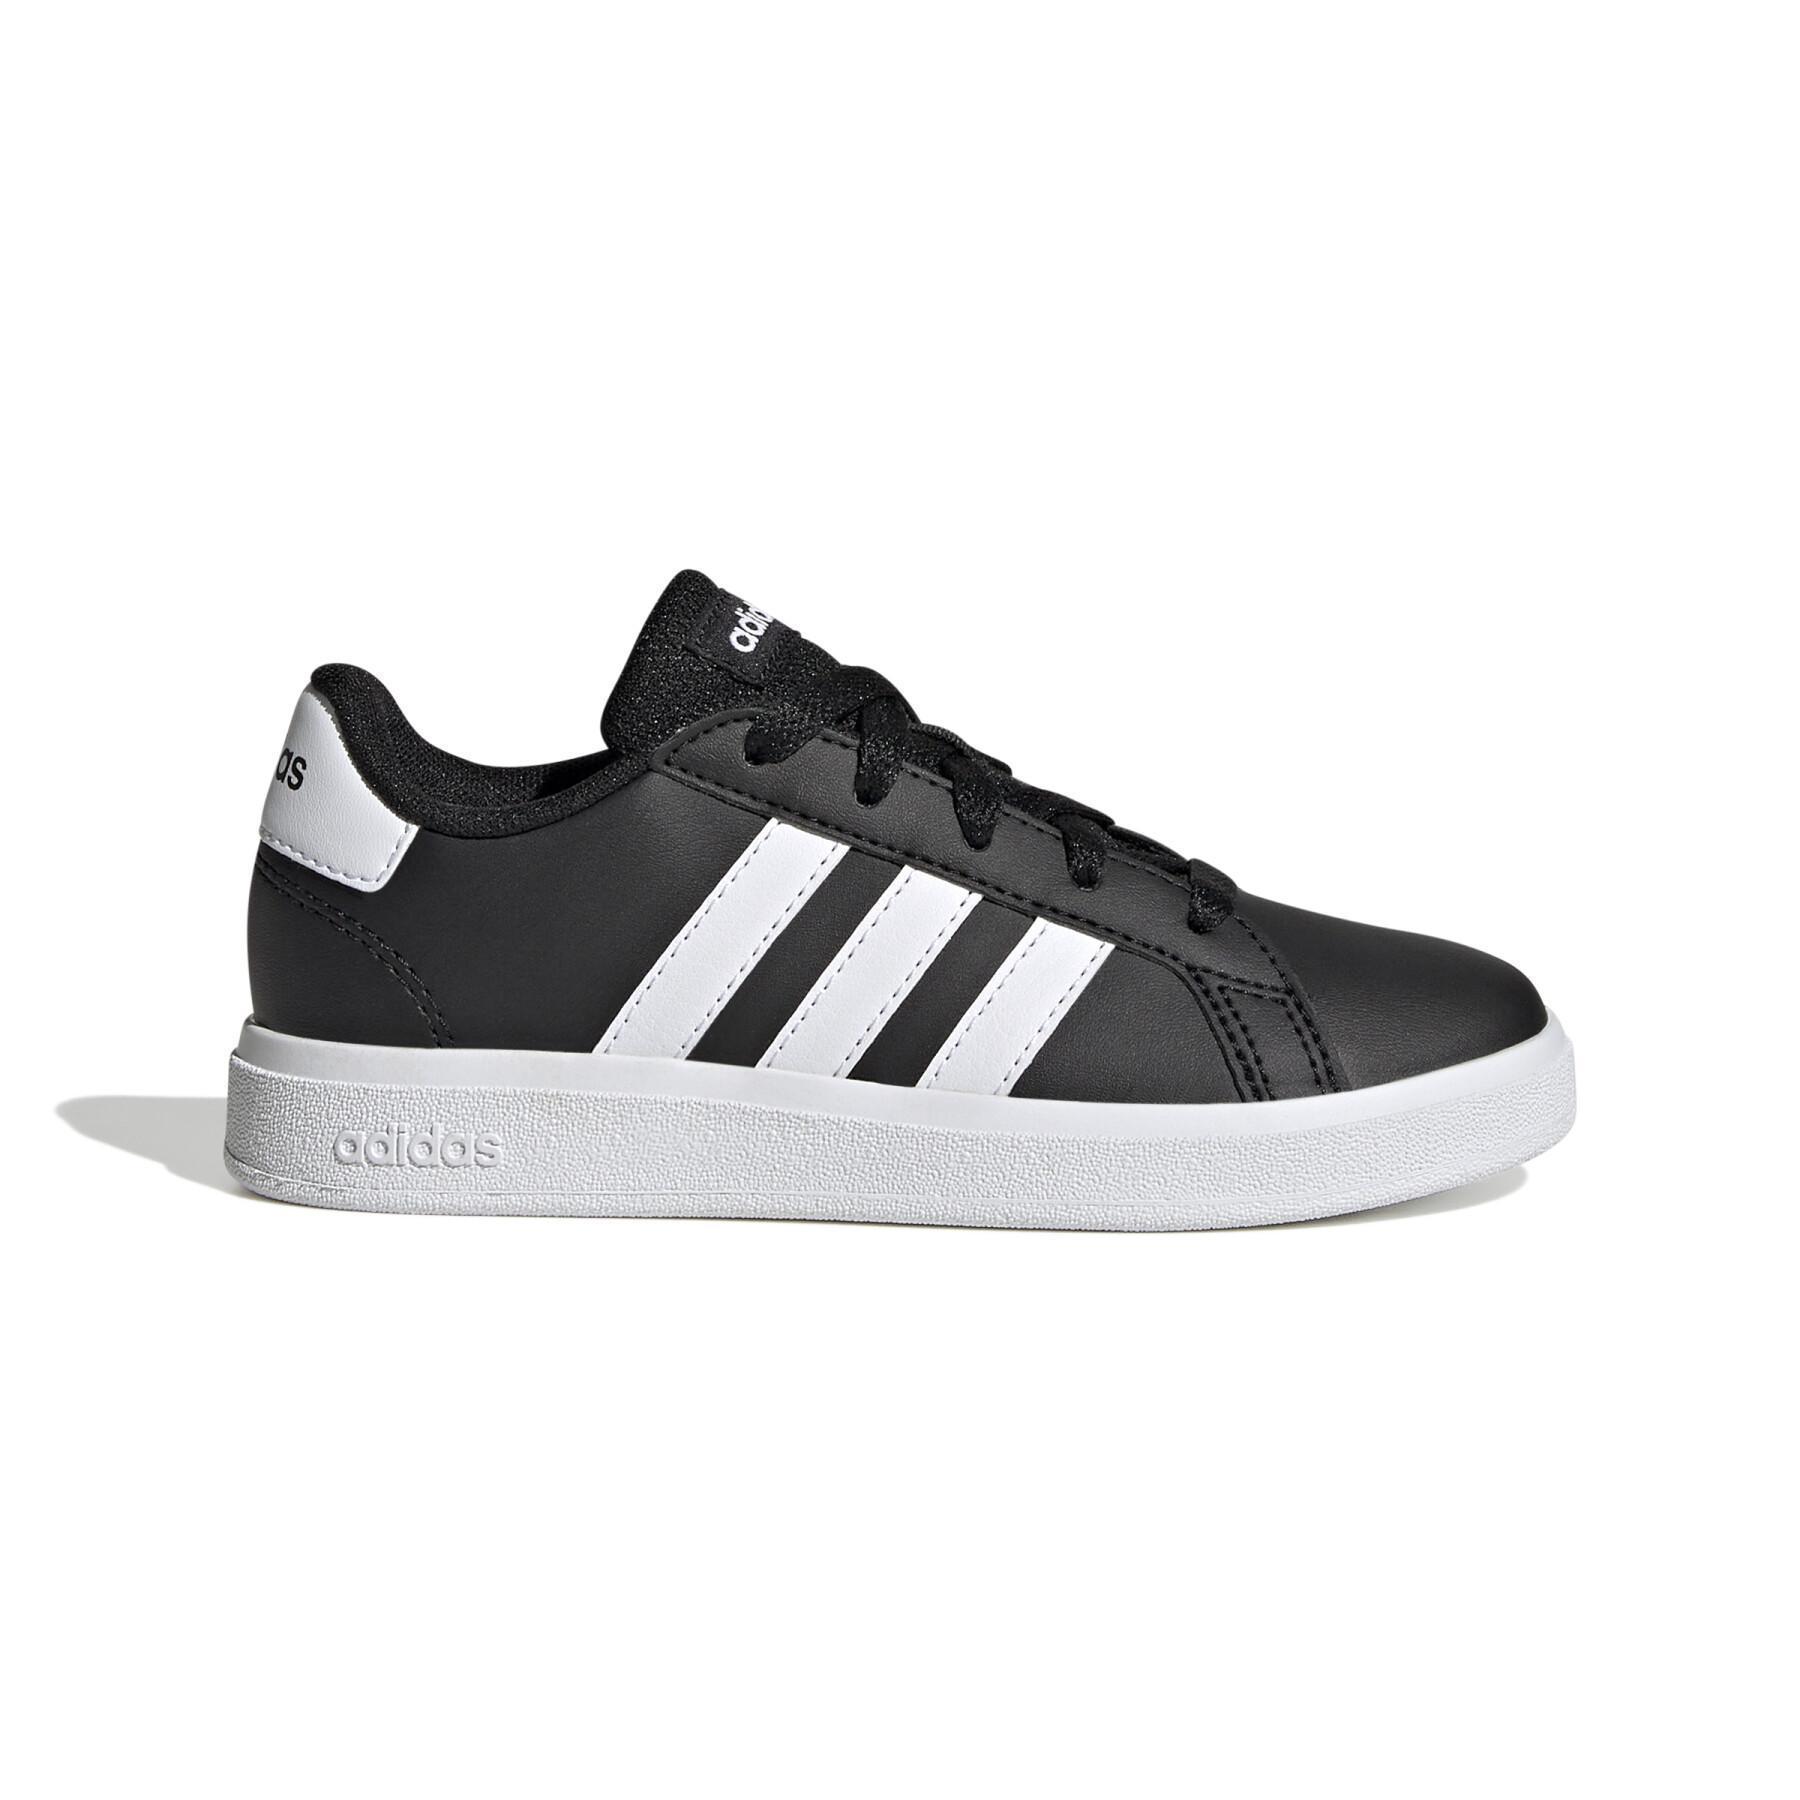 https://media.handball-store.fr/catalog/product/cache/image/1800x/9df78eab33525d08d6e5fb8d27136e95/a/d/adidas-originals_gw6503_1_footwear_photography_side_lateral_center_view_white_000.jpg